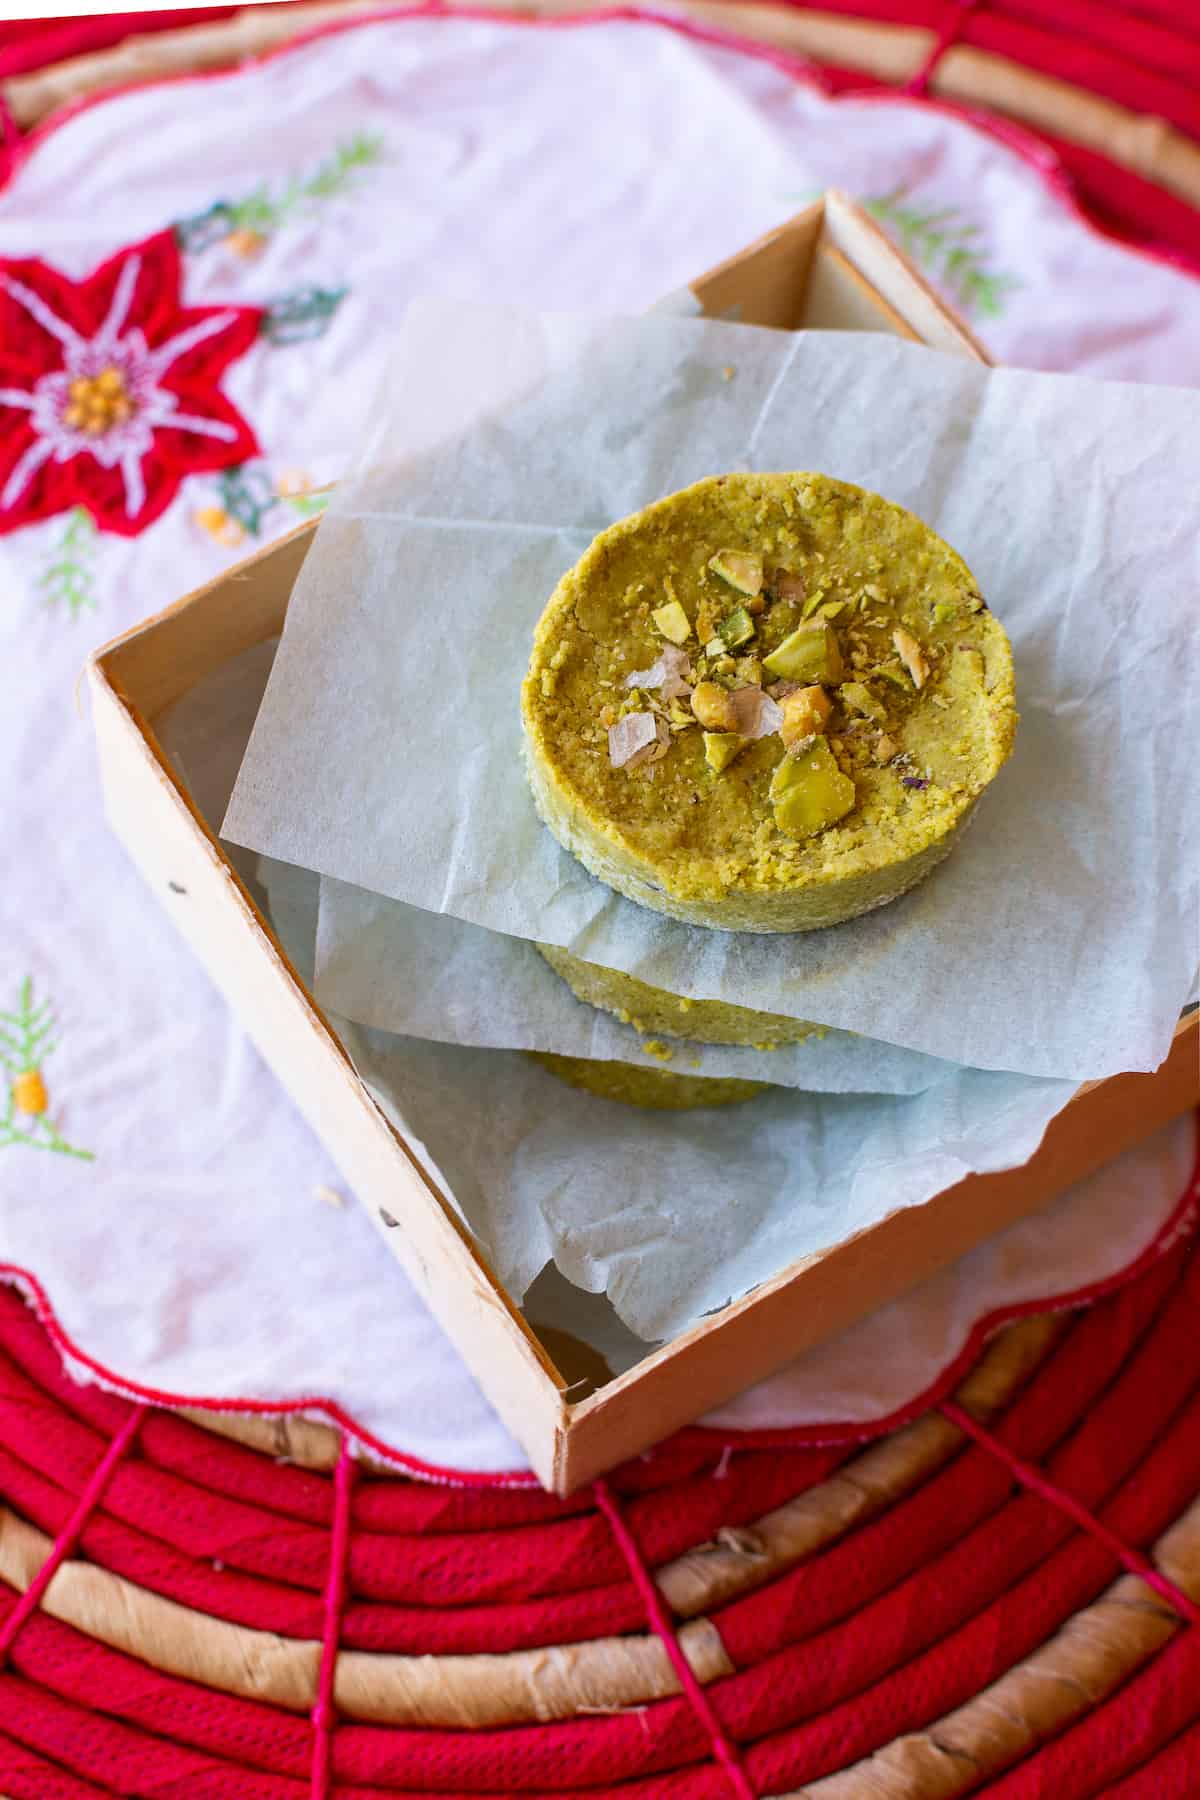 The traditional Mexican candy, Mazapan gets a little makeover with pistachios instead of peanuts. This easy no bake sweet is perfect for homemade holiday gifts or to put on a Christmas cookie platter. Vegan and gluten-free! #mazapan #pistachios #mazapancandy #mexicancandy